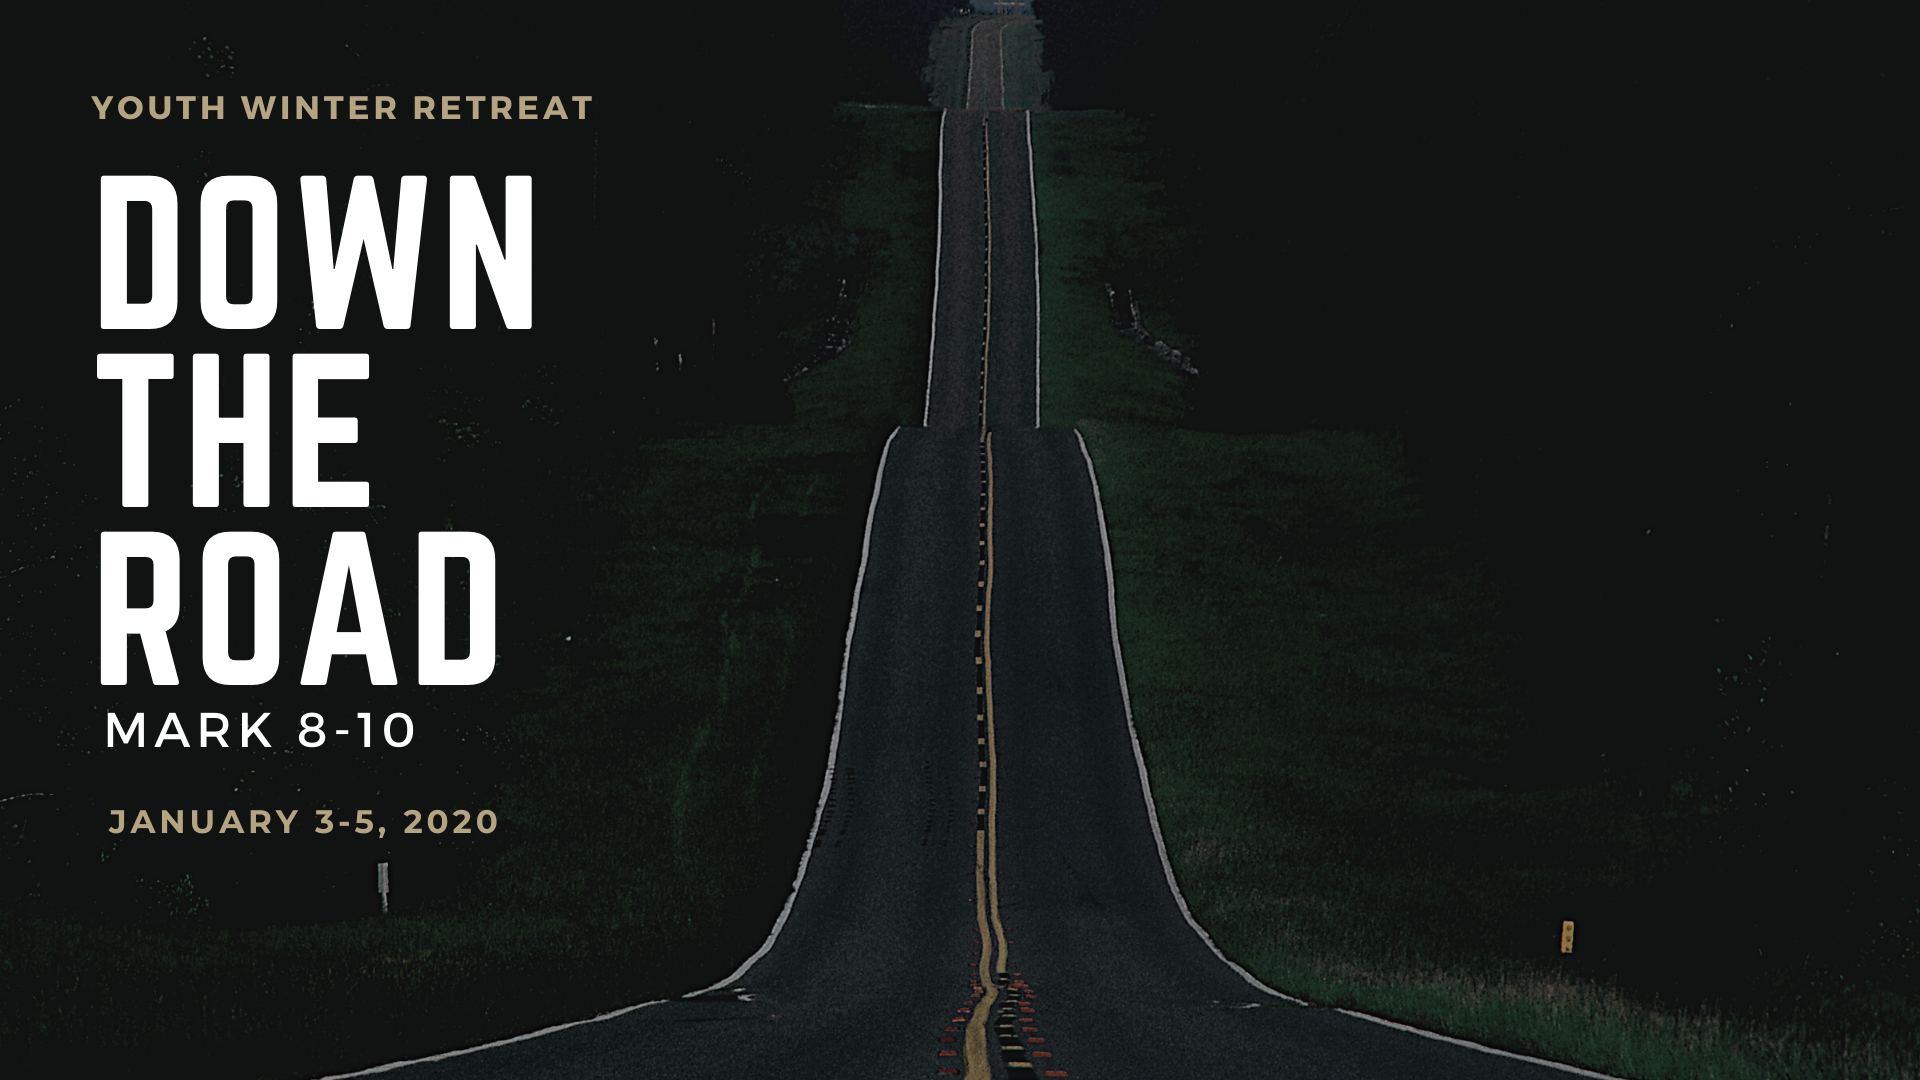 Down the Road: Youth Winter Retreat 2020